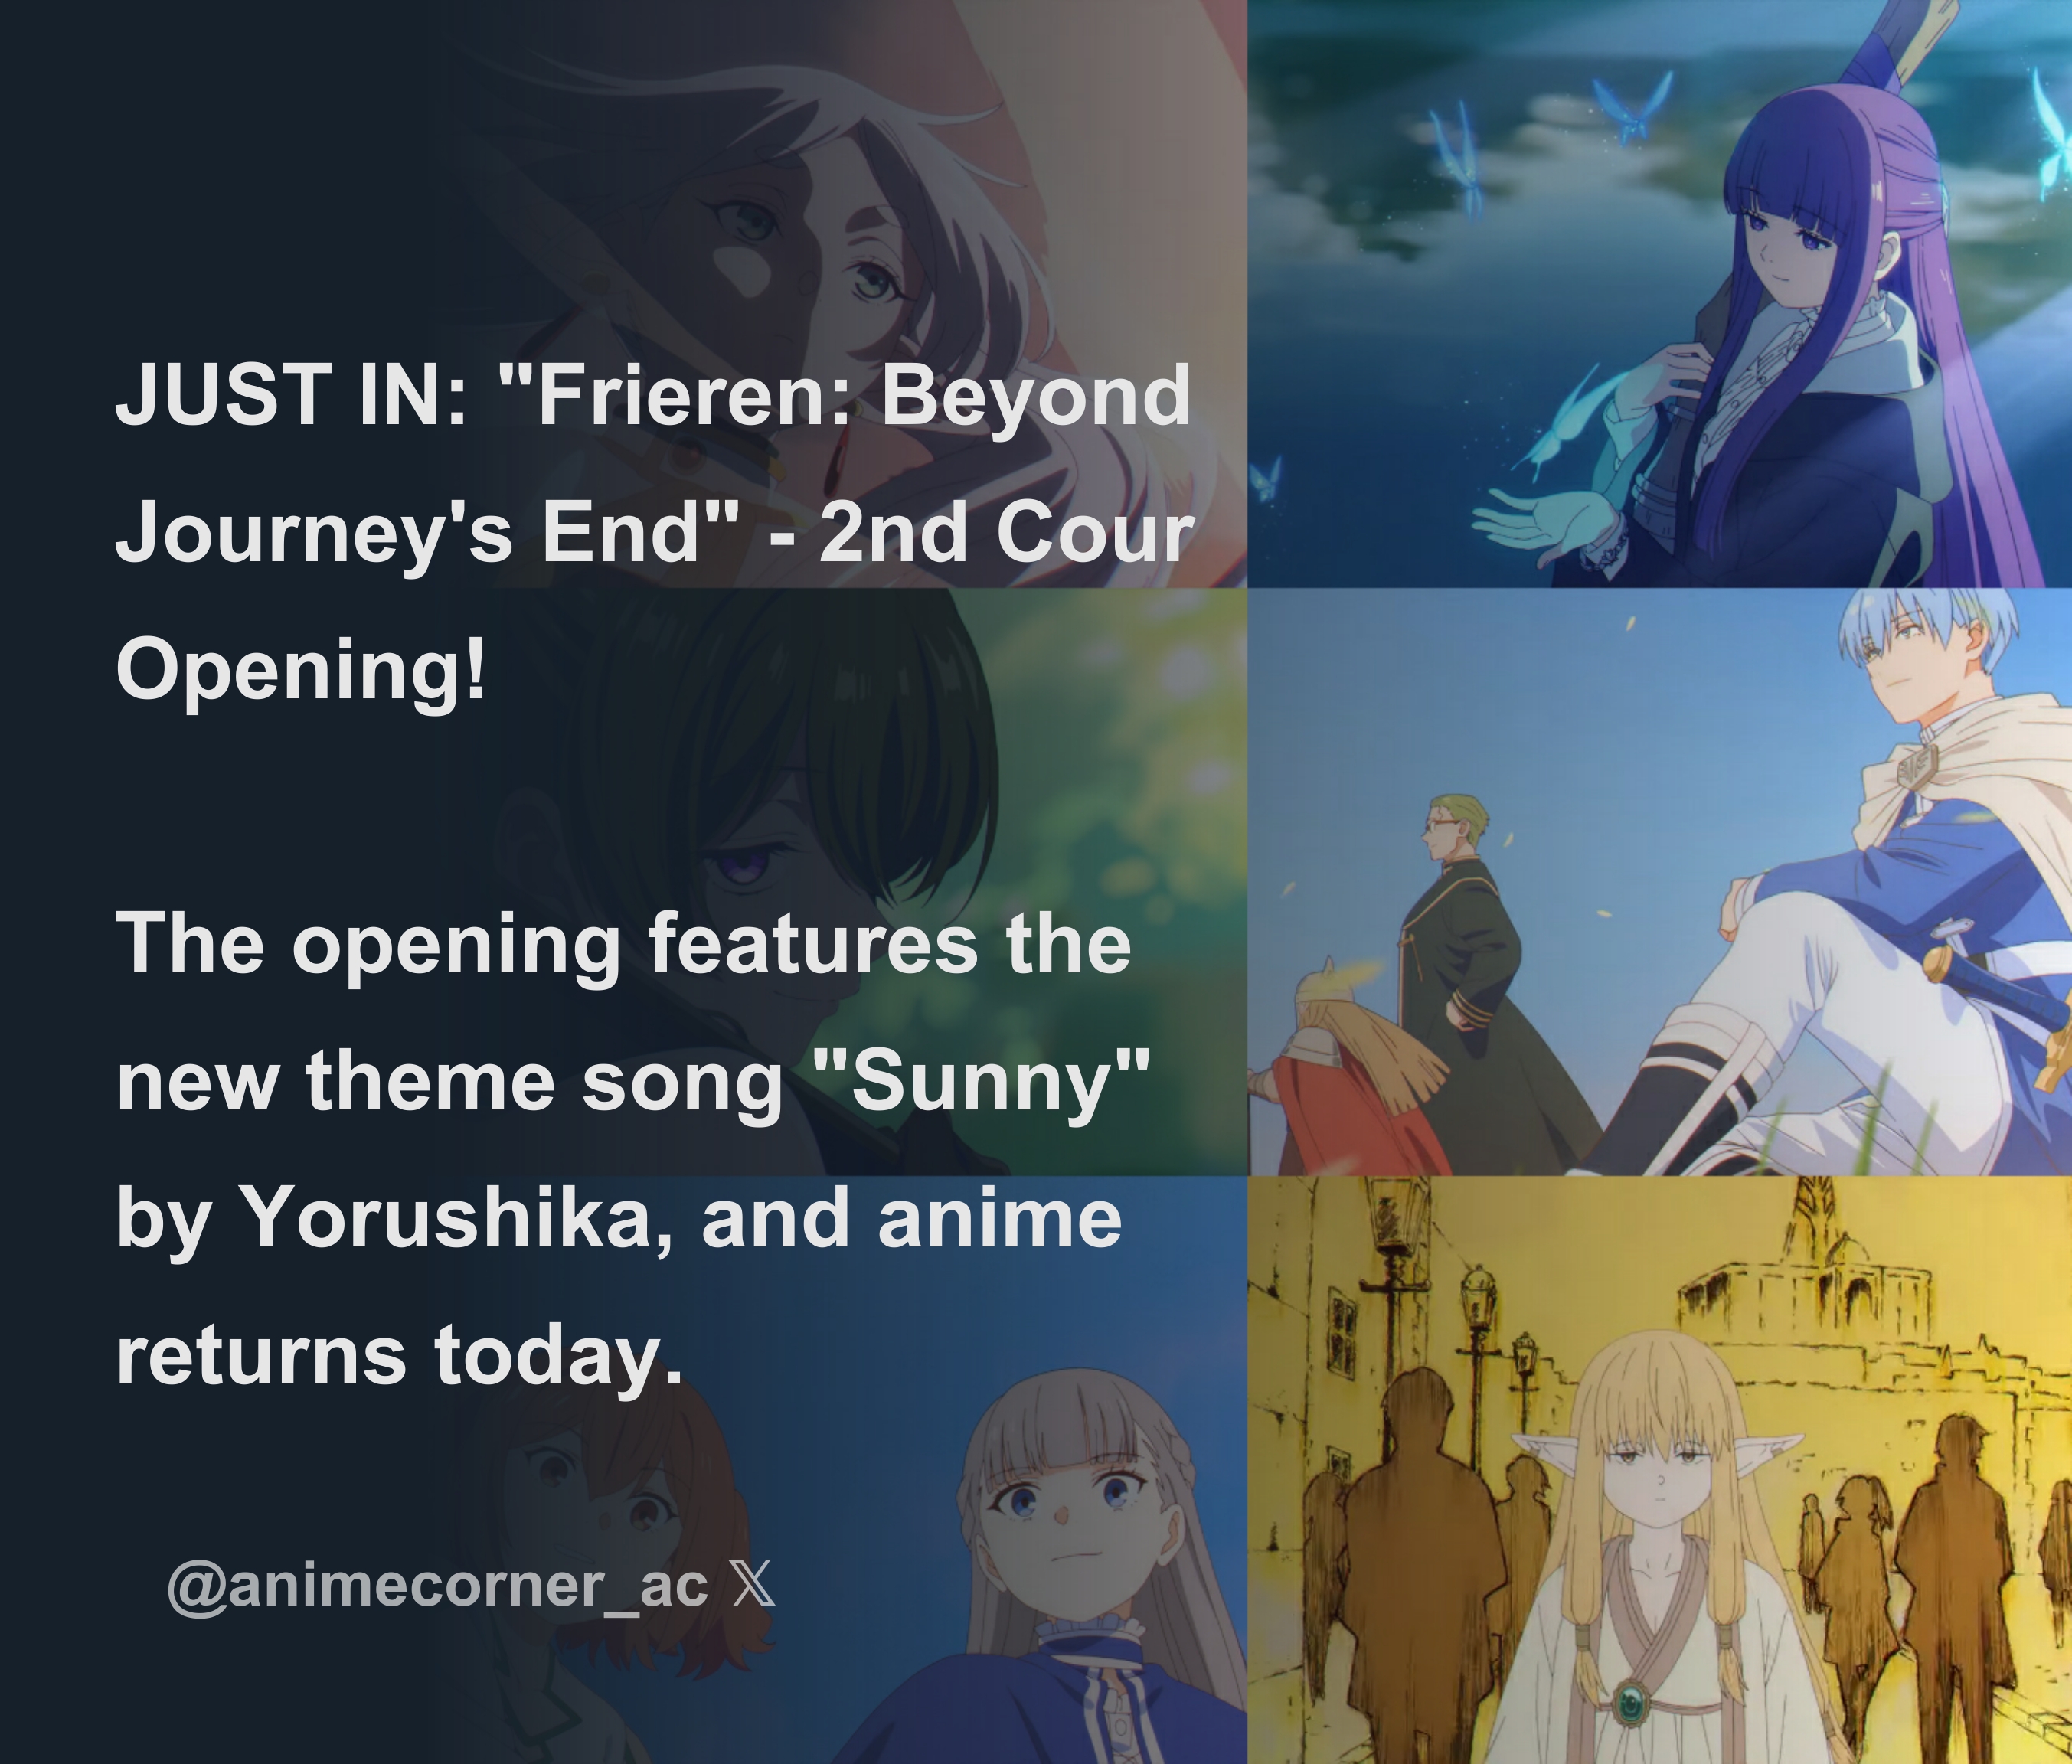 JUST IN: Frieren: Beyond Journey's End - 2nd Cour Opening! The opening  features the new theme song Sunny by Yorushika, and anime returns today.  - Thread from Anime Corner @animecorner_ac - Rattibha